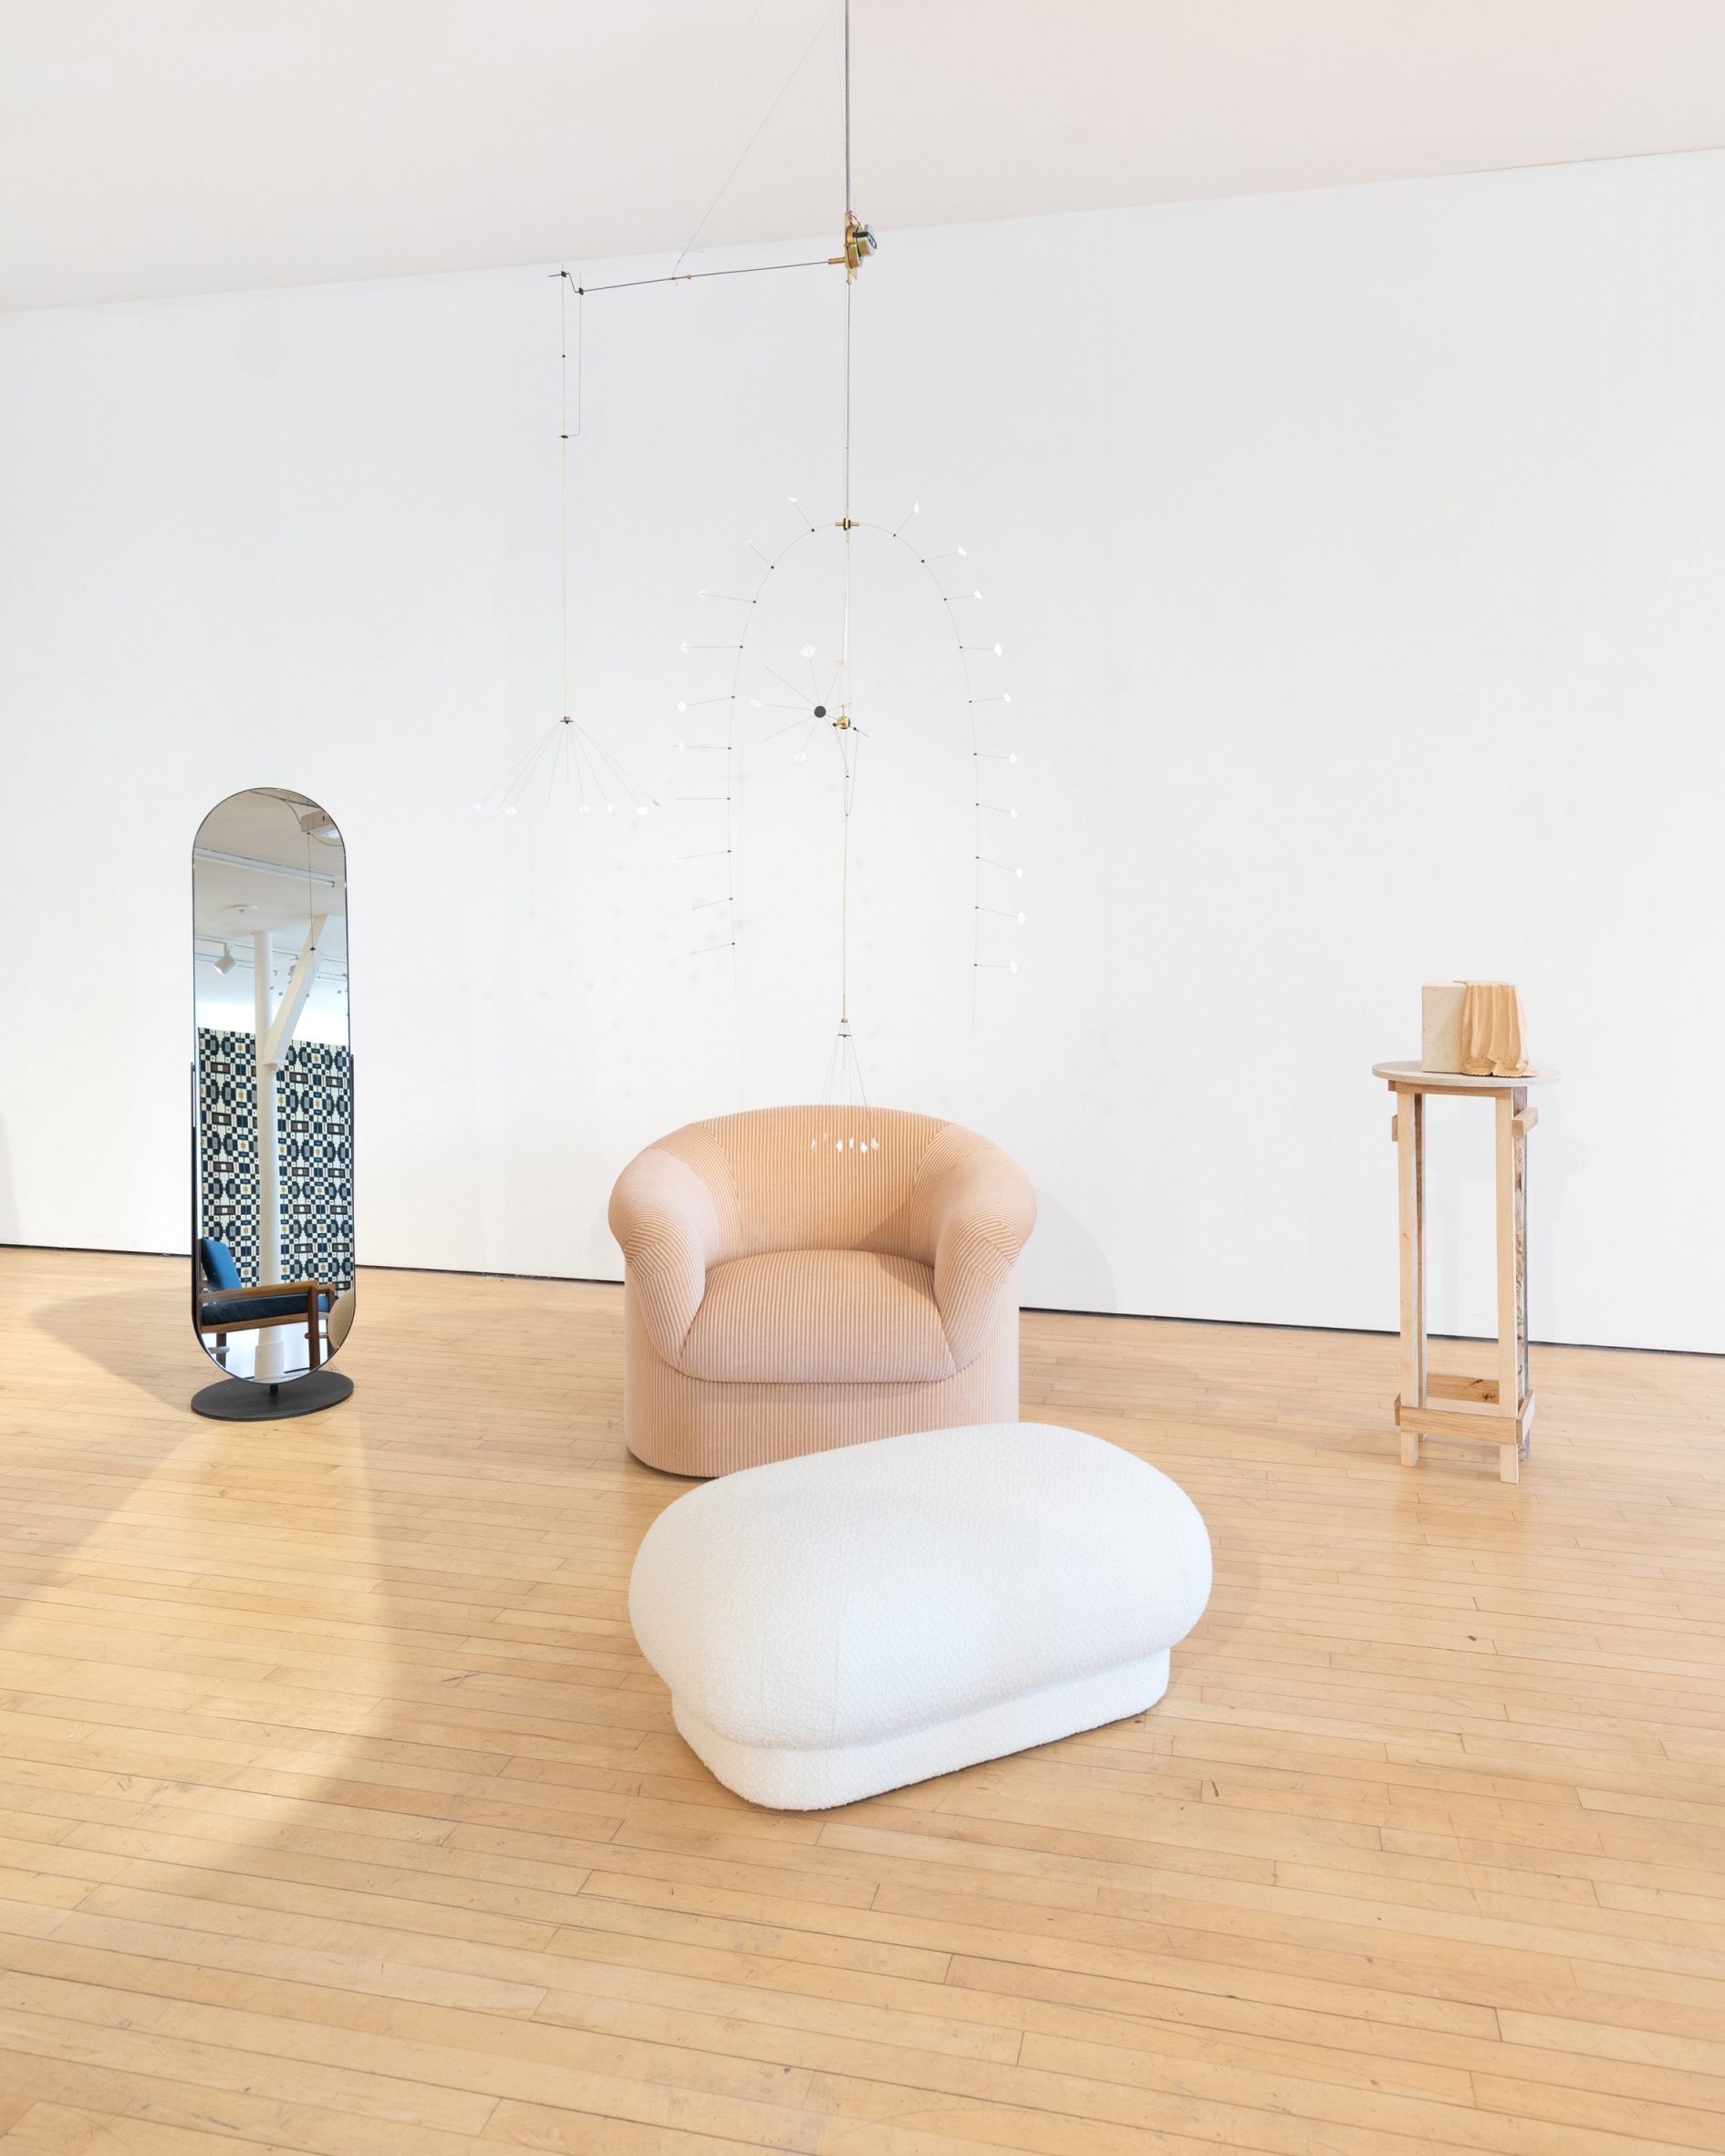 The Port Free Mirror by Novocastrian alongside the Roll Top Chair and Roll Top Ottoman by Sedilia with Song 1 Awe-to Series by William Waterhouse hanging from ceiling and Draped in Wood by Silje Loa on a plinth